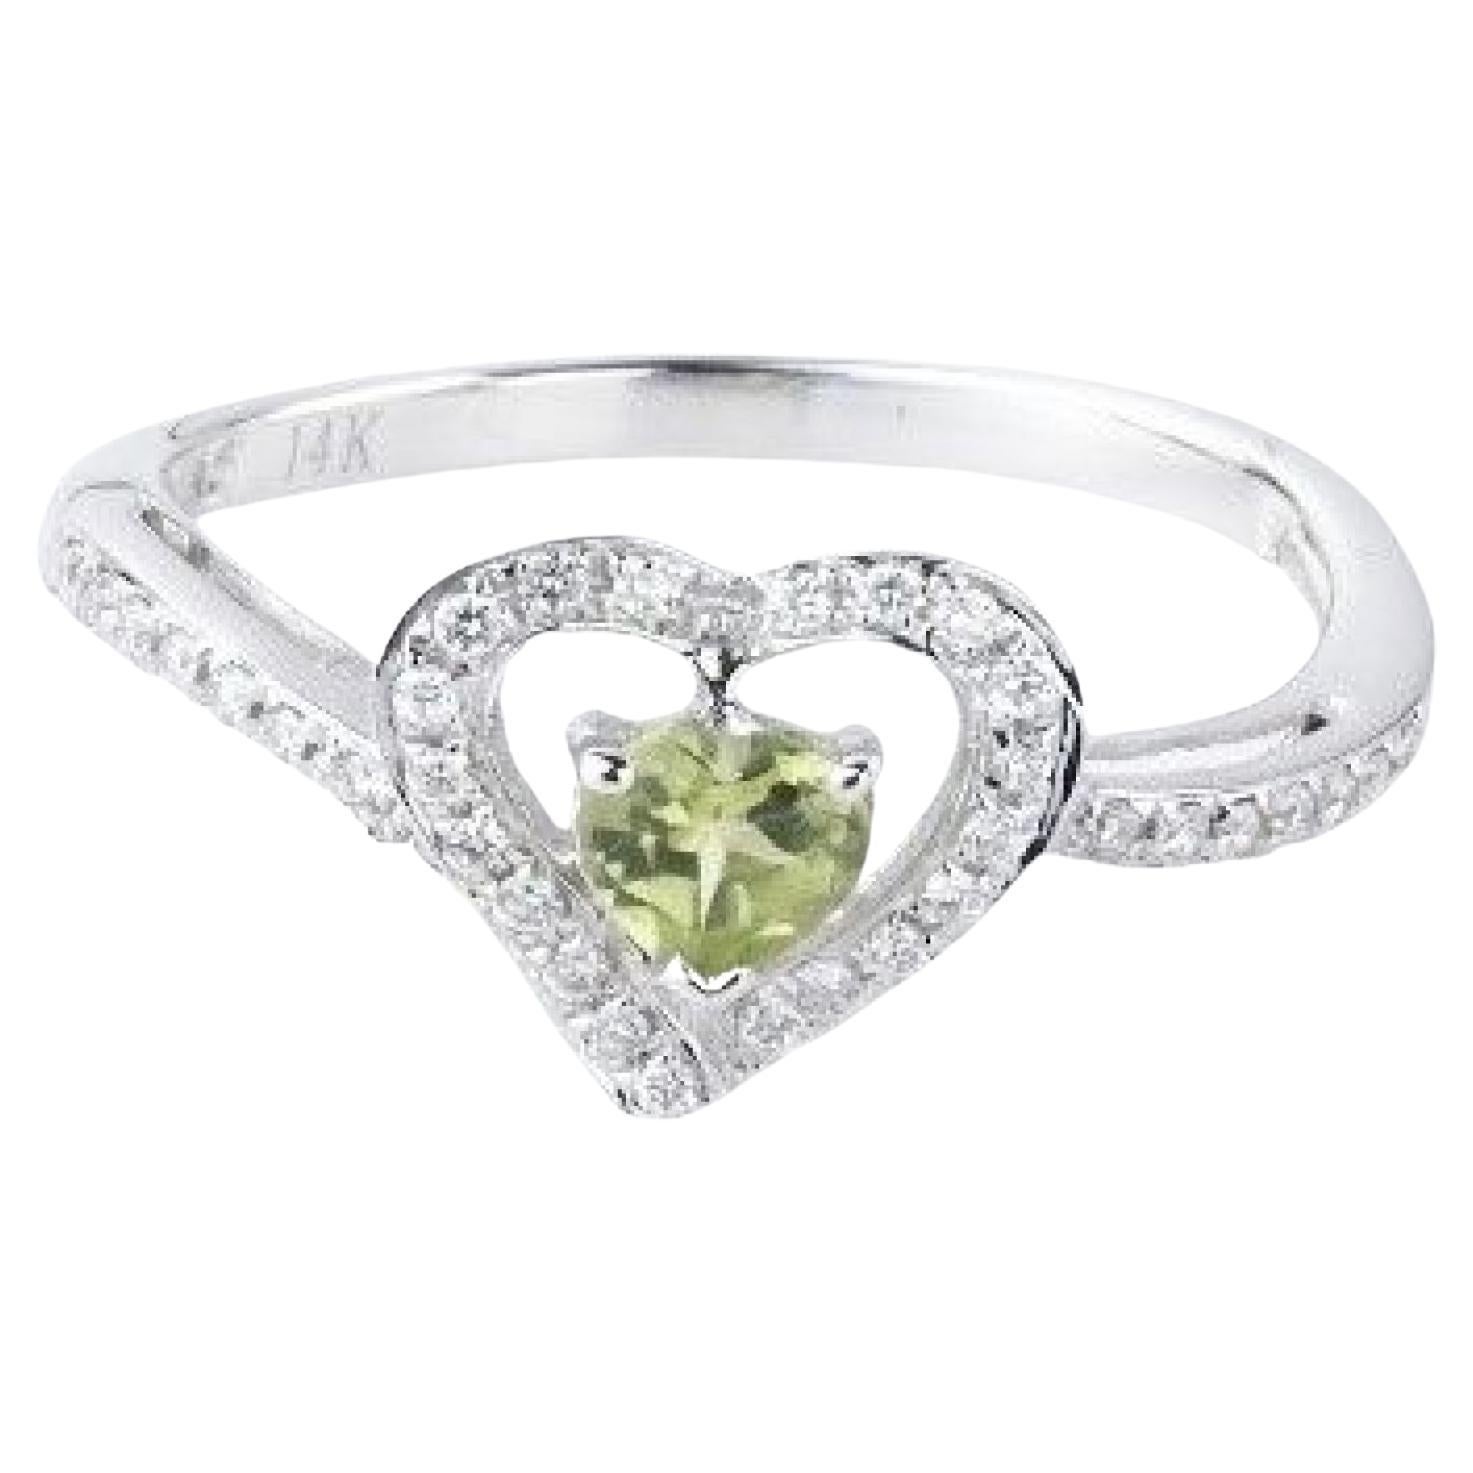 For Sale:  0.287 Carat Peridot and Diamond Heart Ring in 14 Karat White Gold